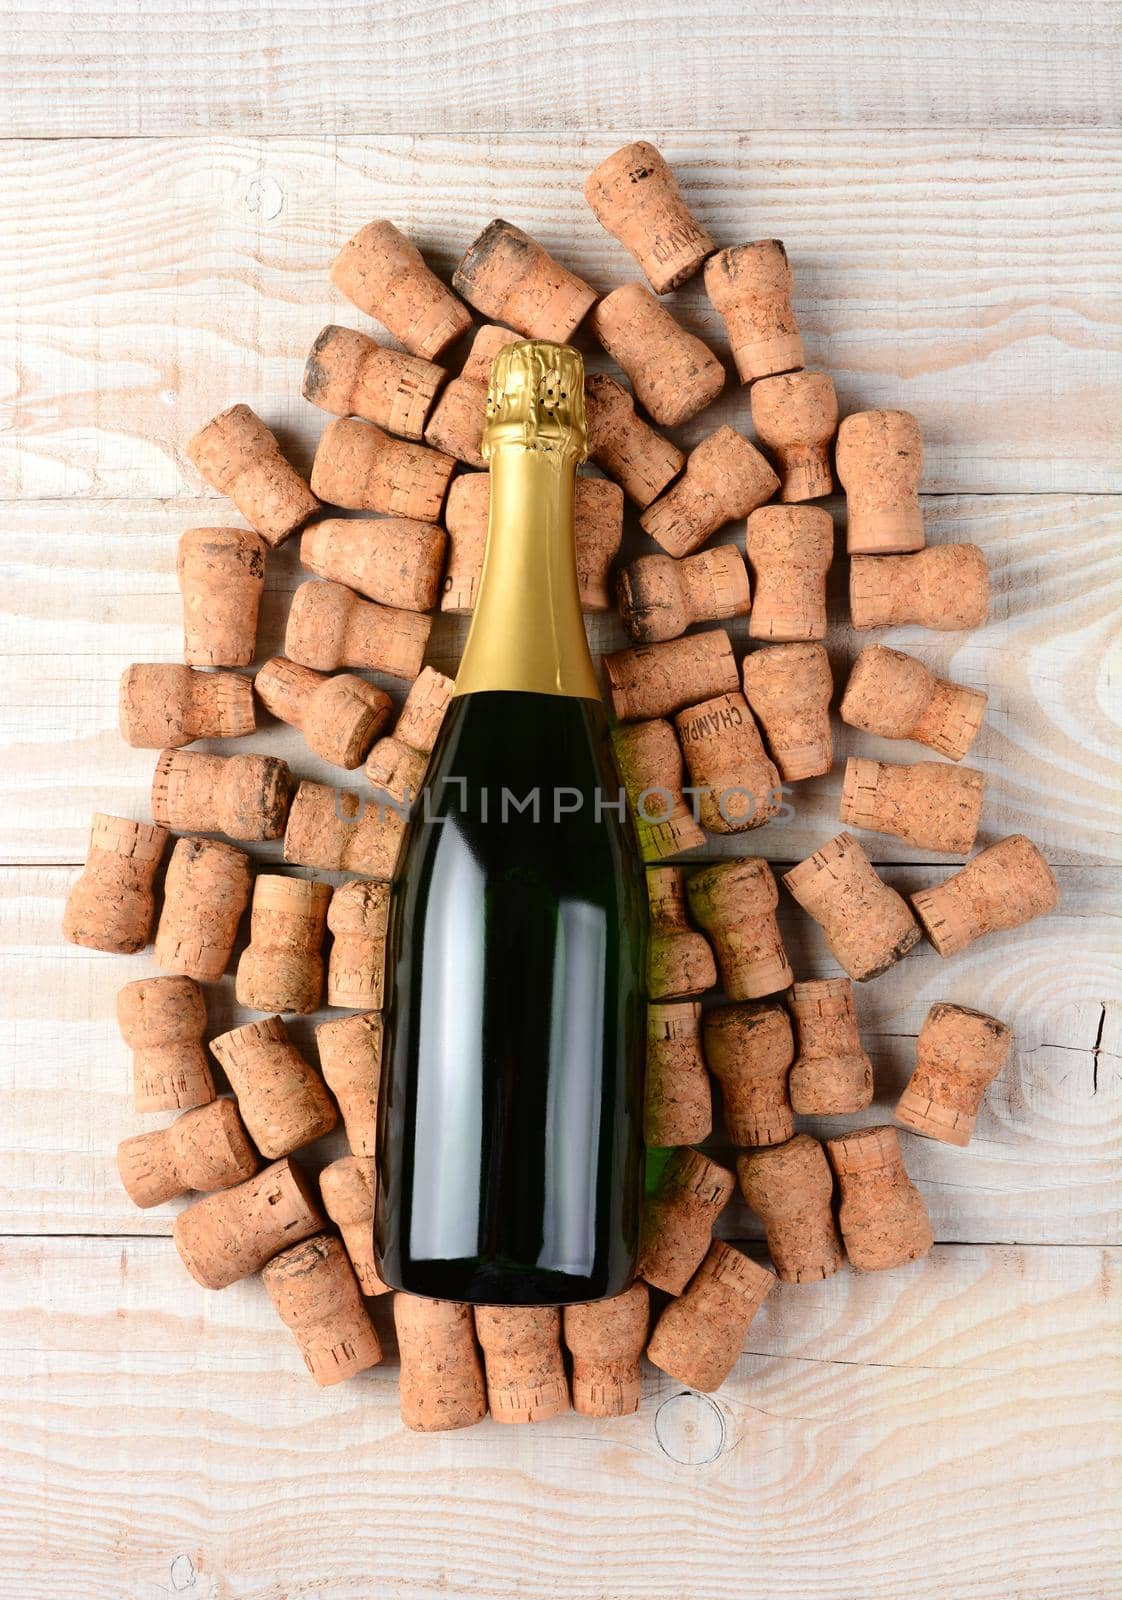 Champagne Bottle and Corks by sCukrov